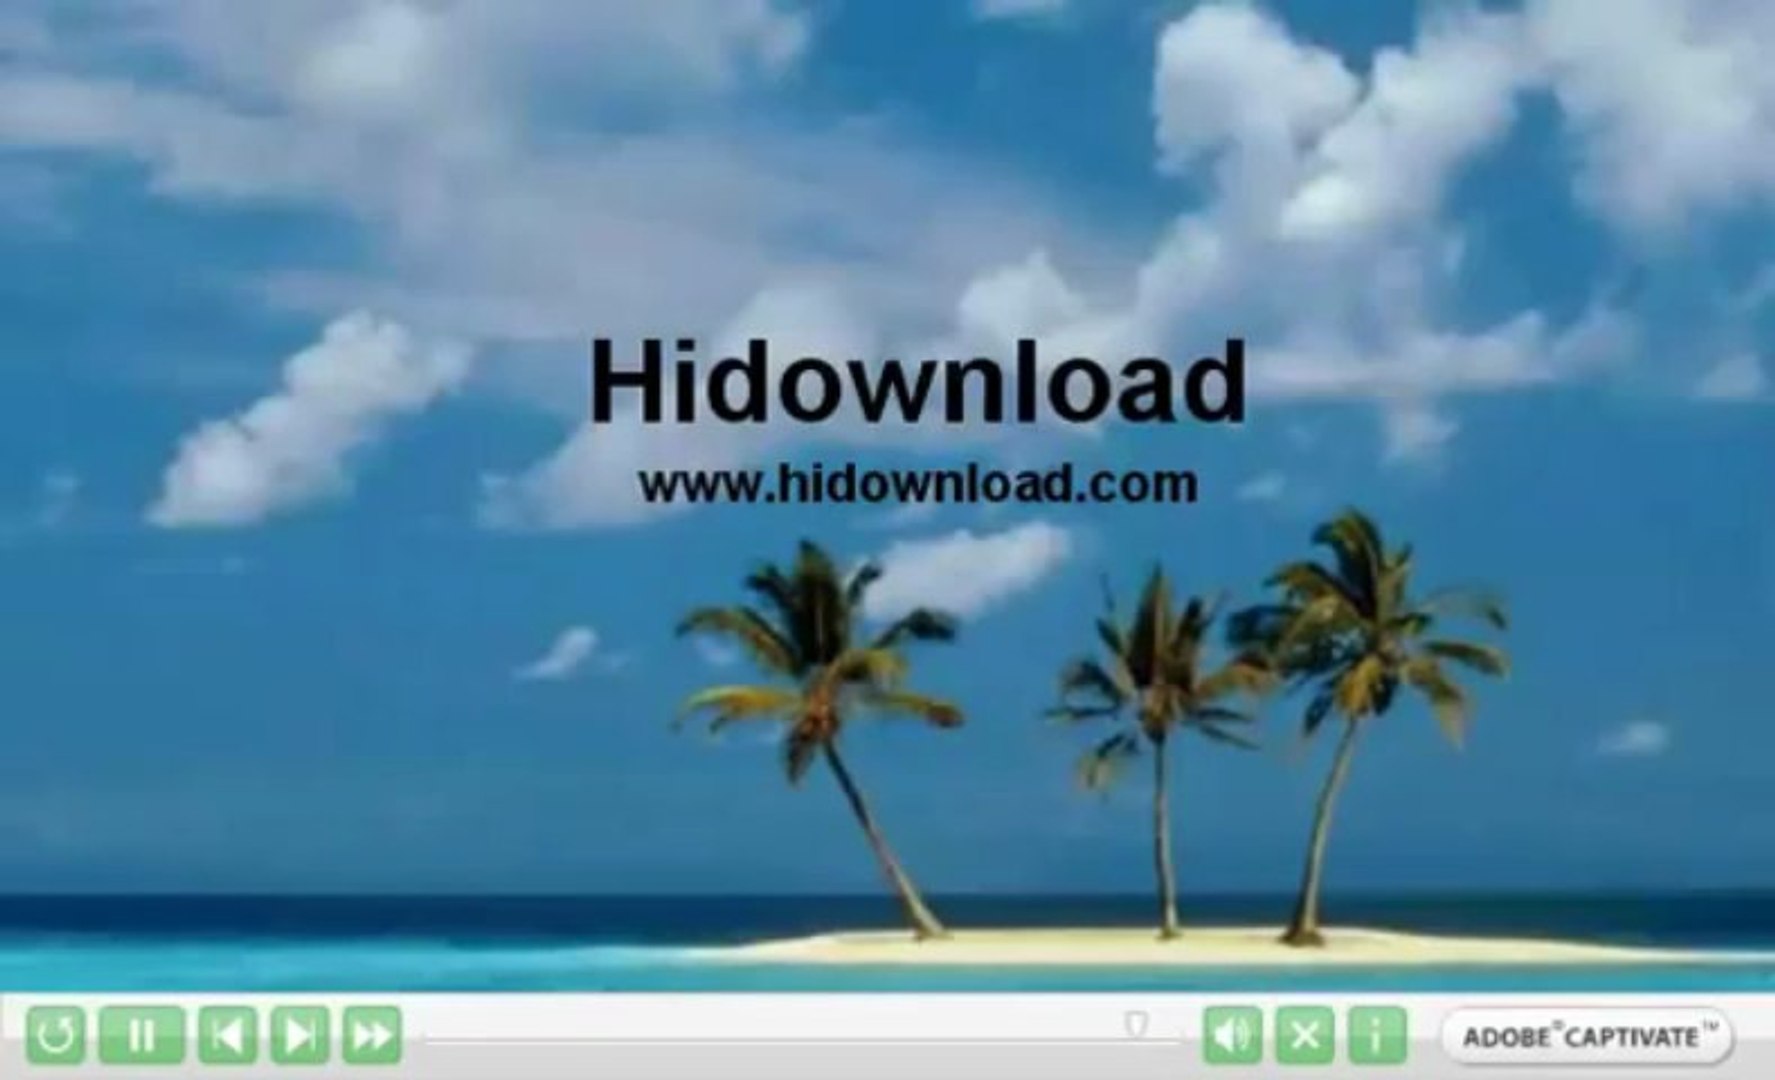 how to download music videos from online video website bet.com